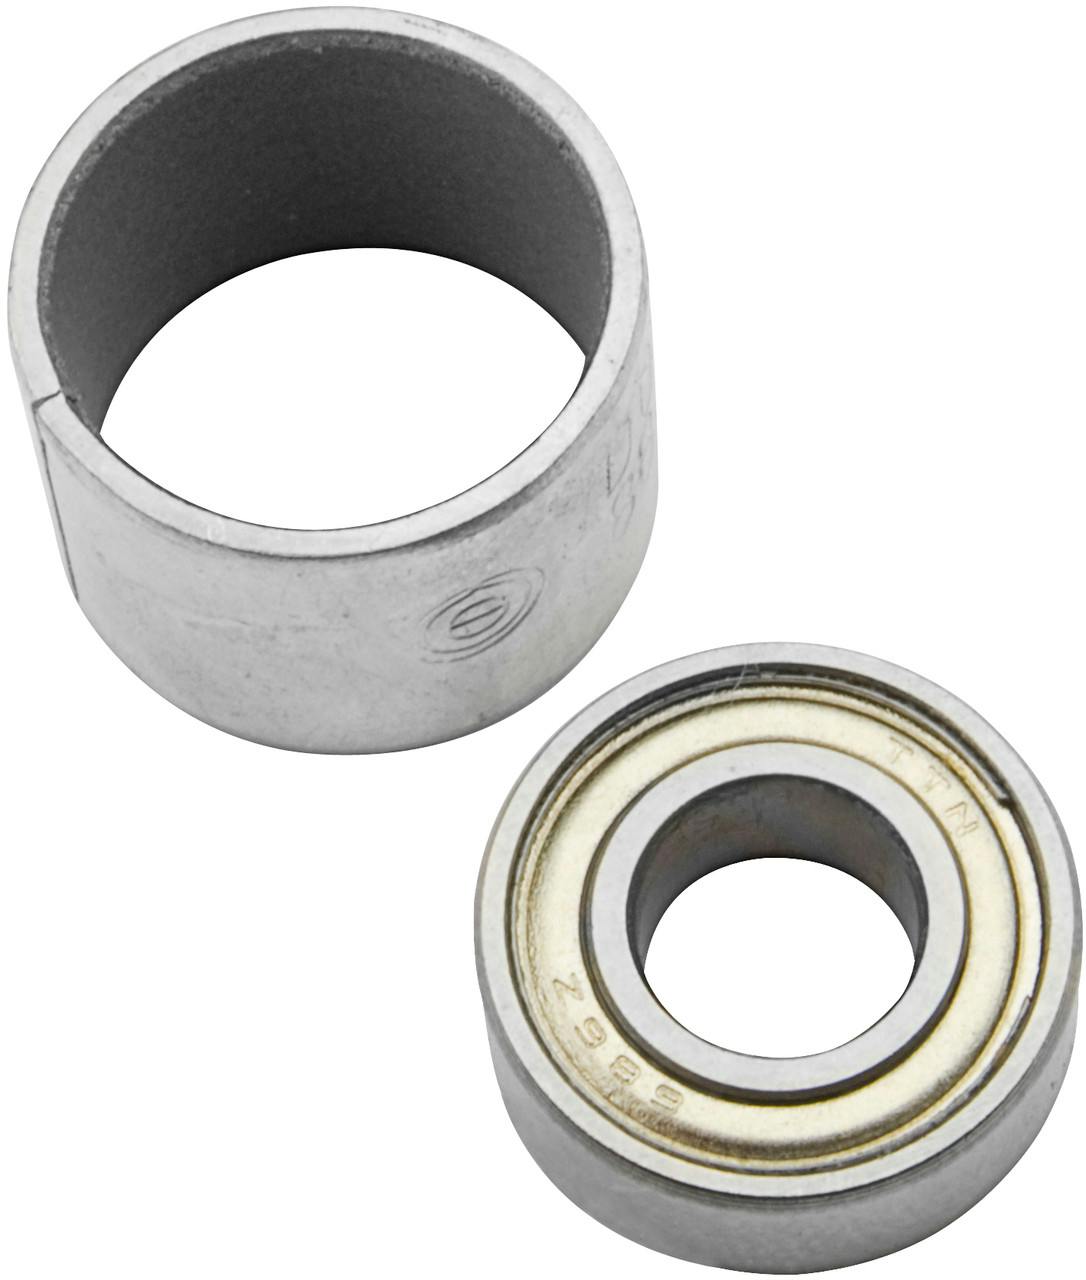 Replacement Pedal Bearing Set Silver